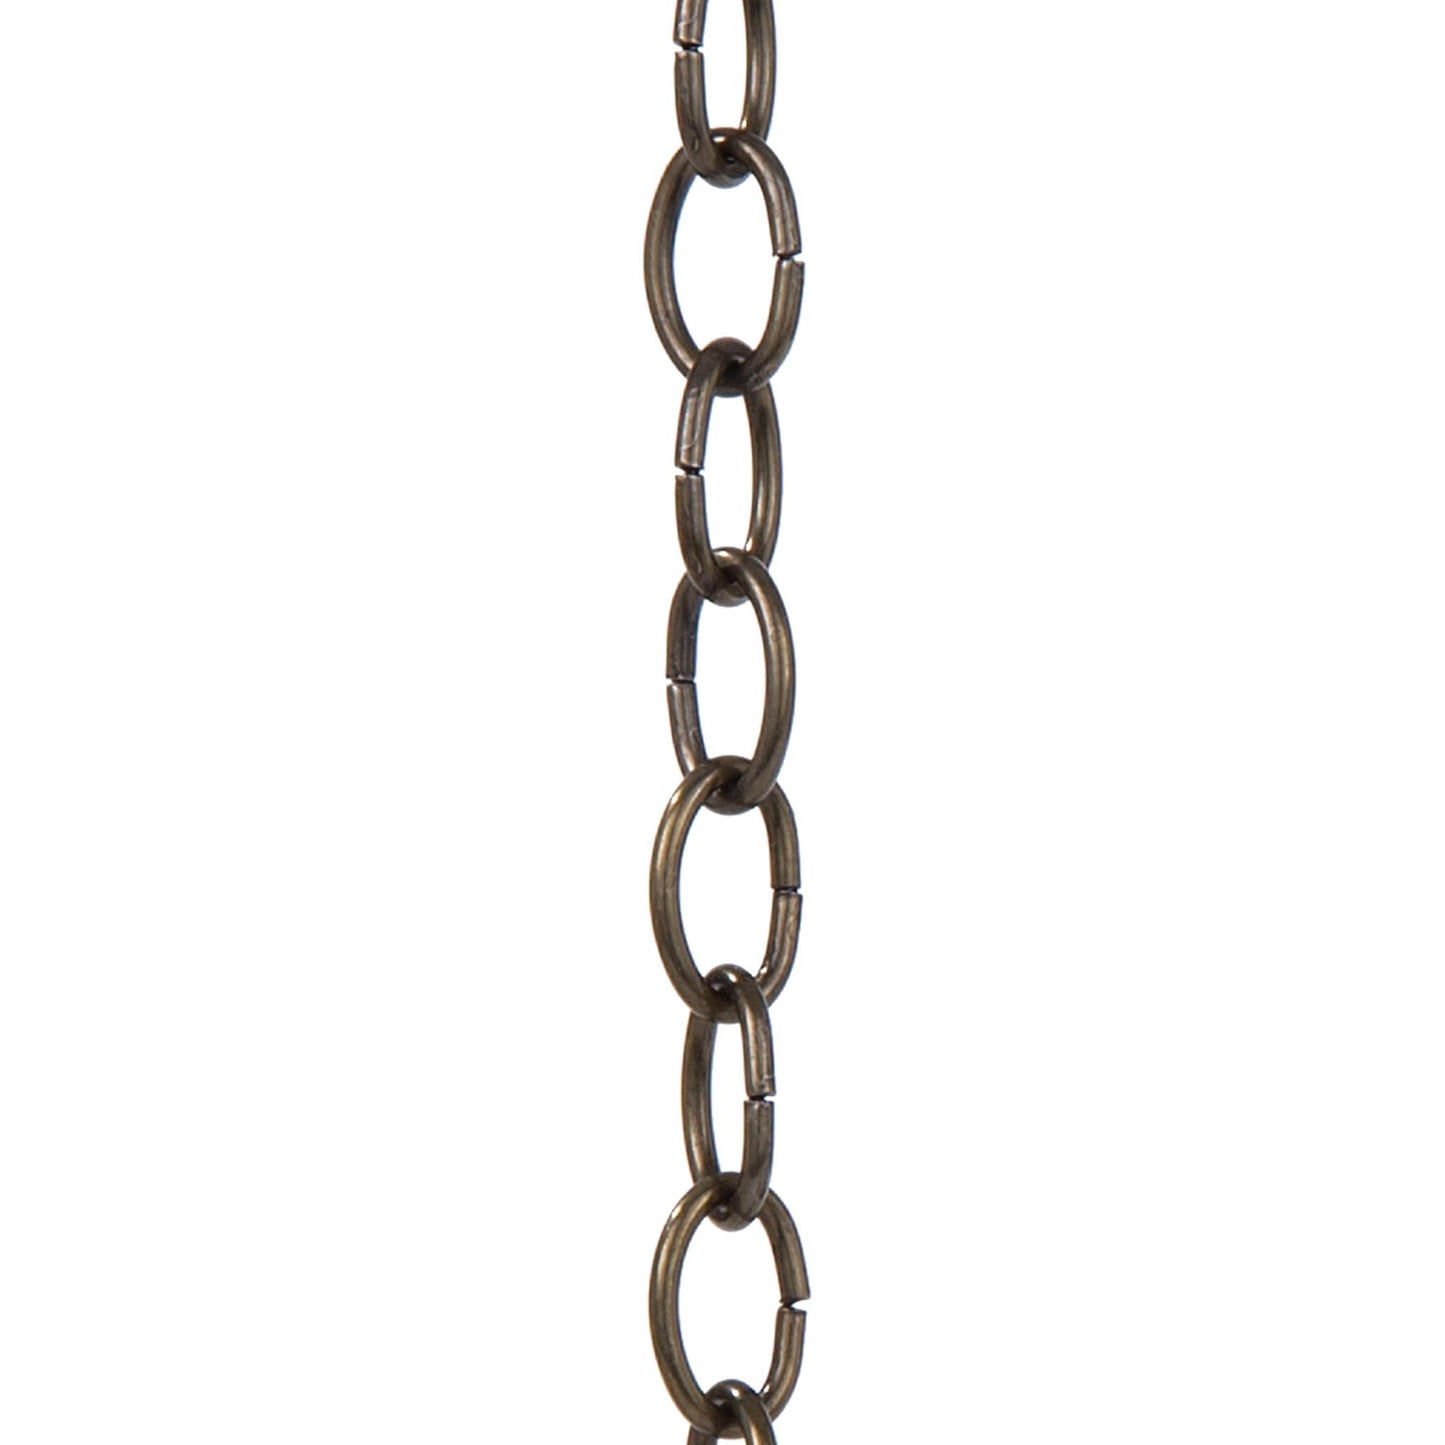 Baby Oval Steel Lamp Chain w/Antique Finish, 3/4" X 5/8" Links (13010A)